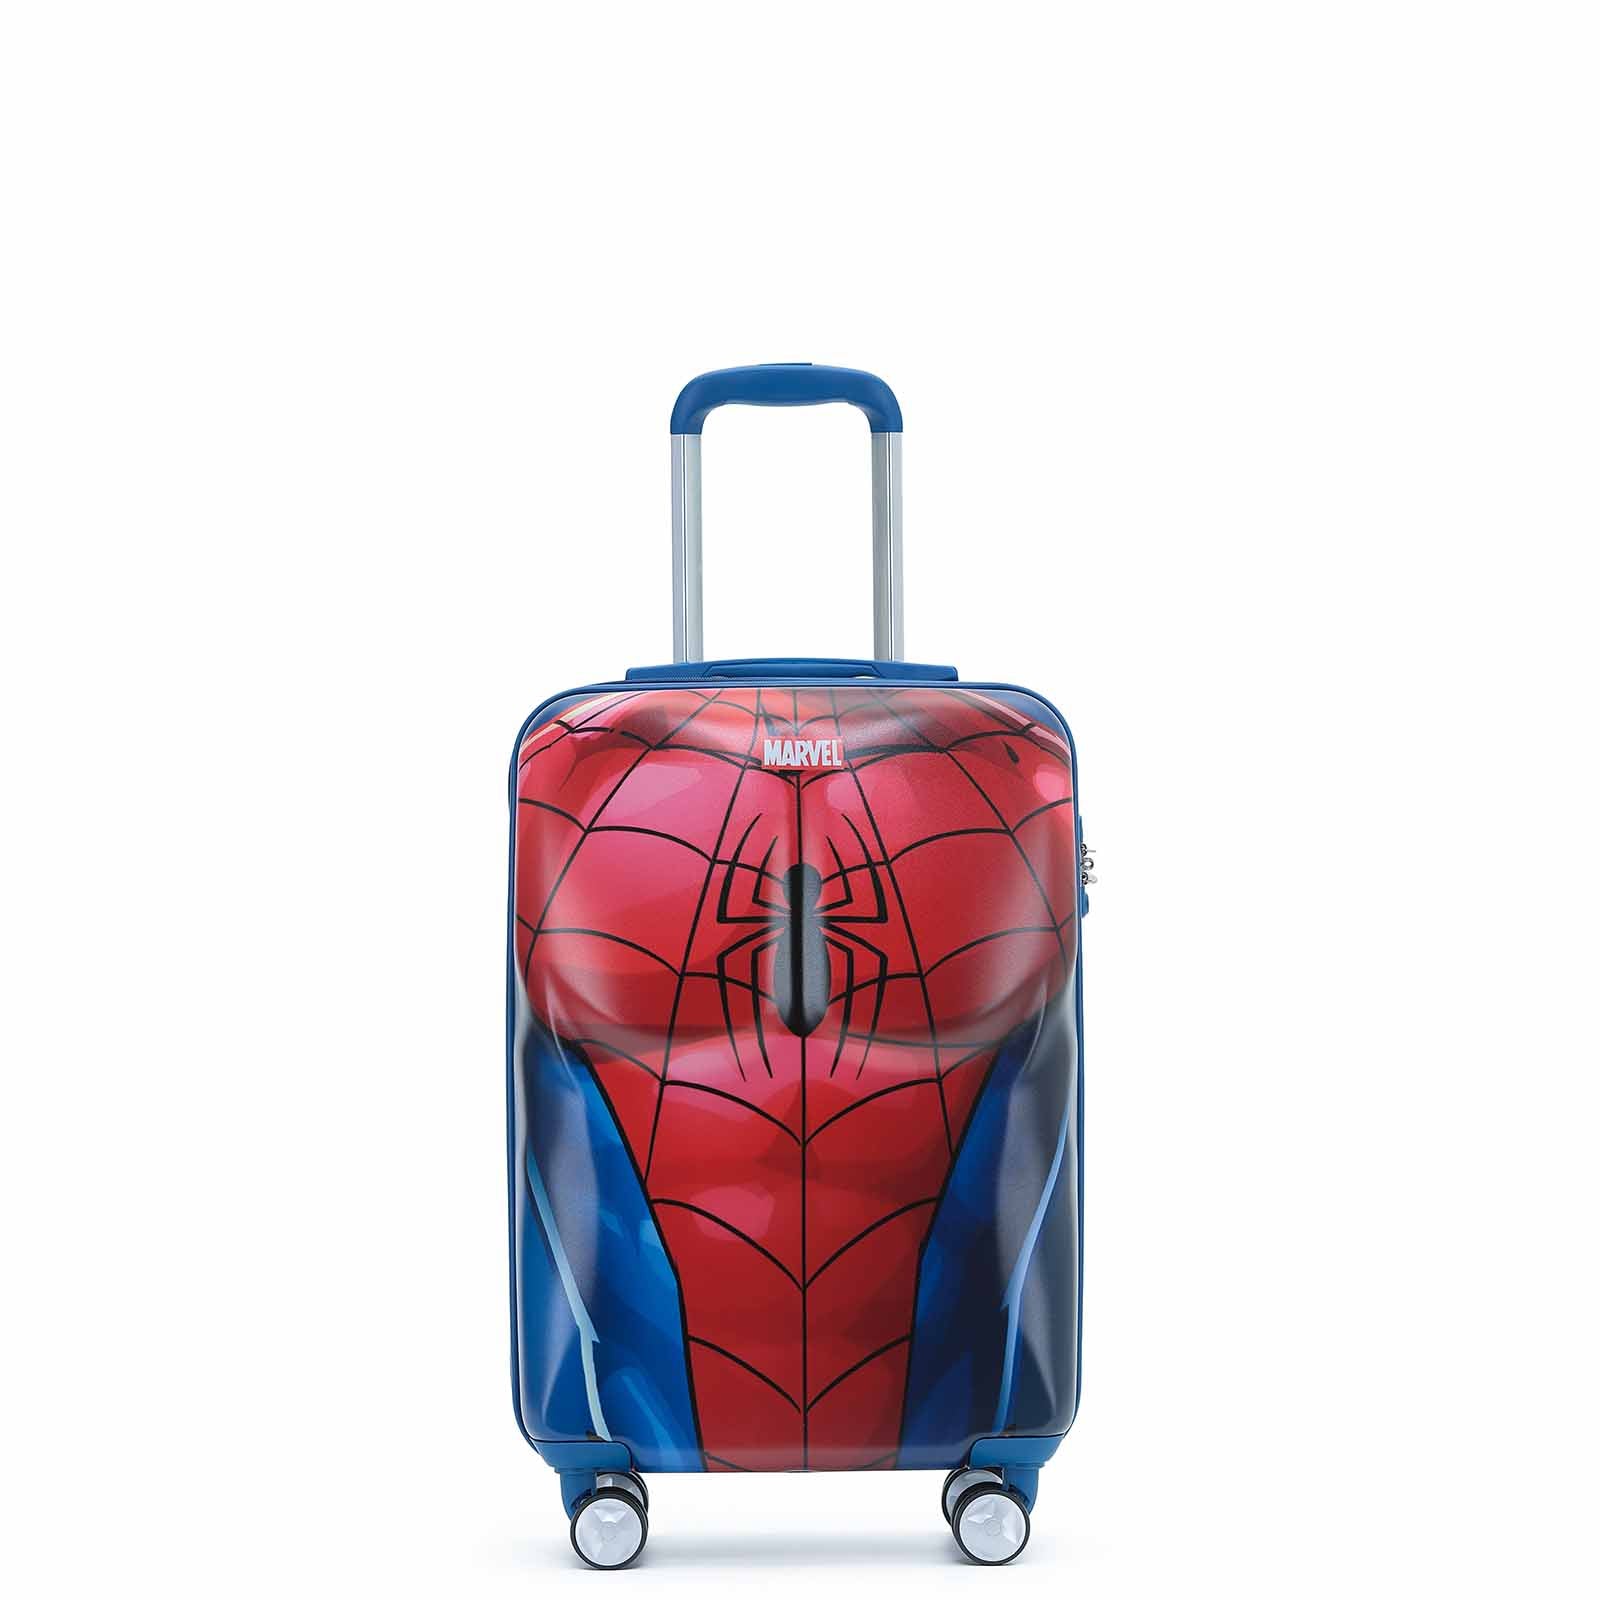 Marvel Spider-Man 19inch Carry-On Suitcase